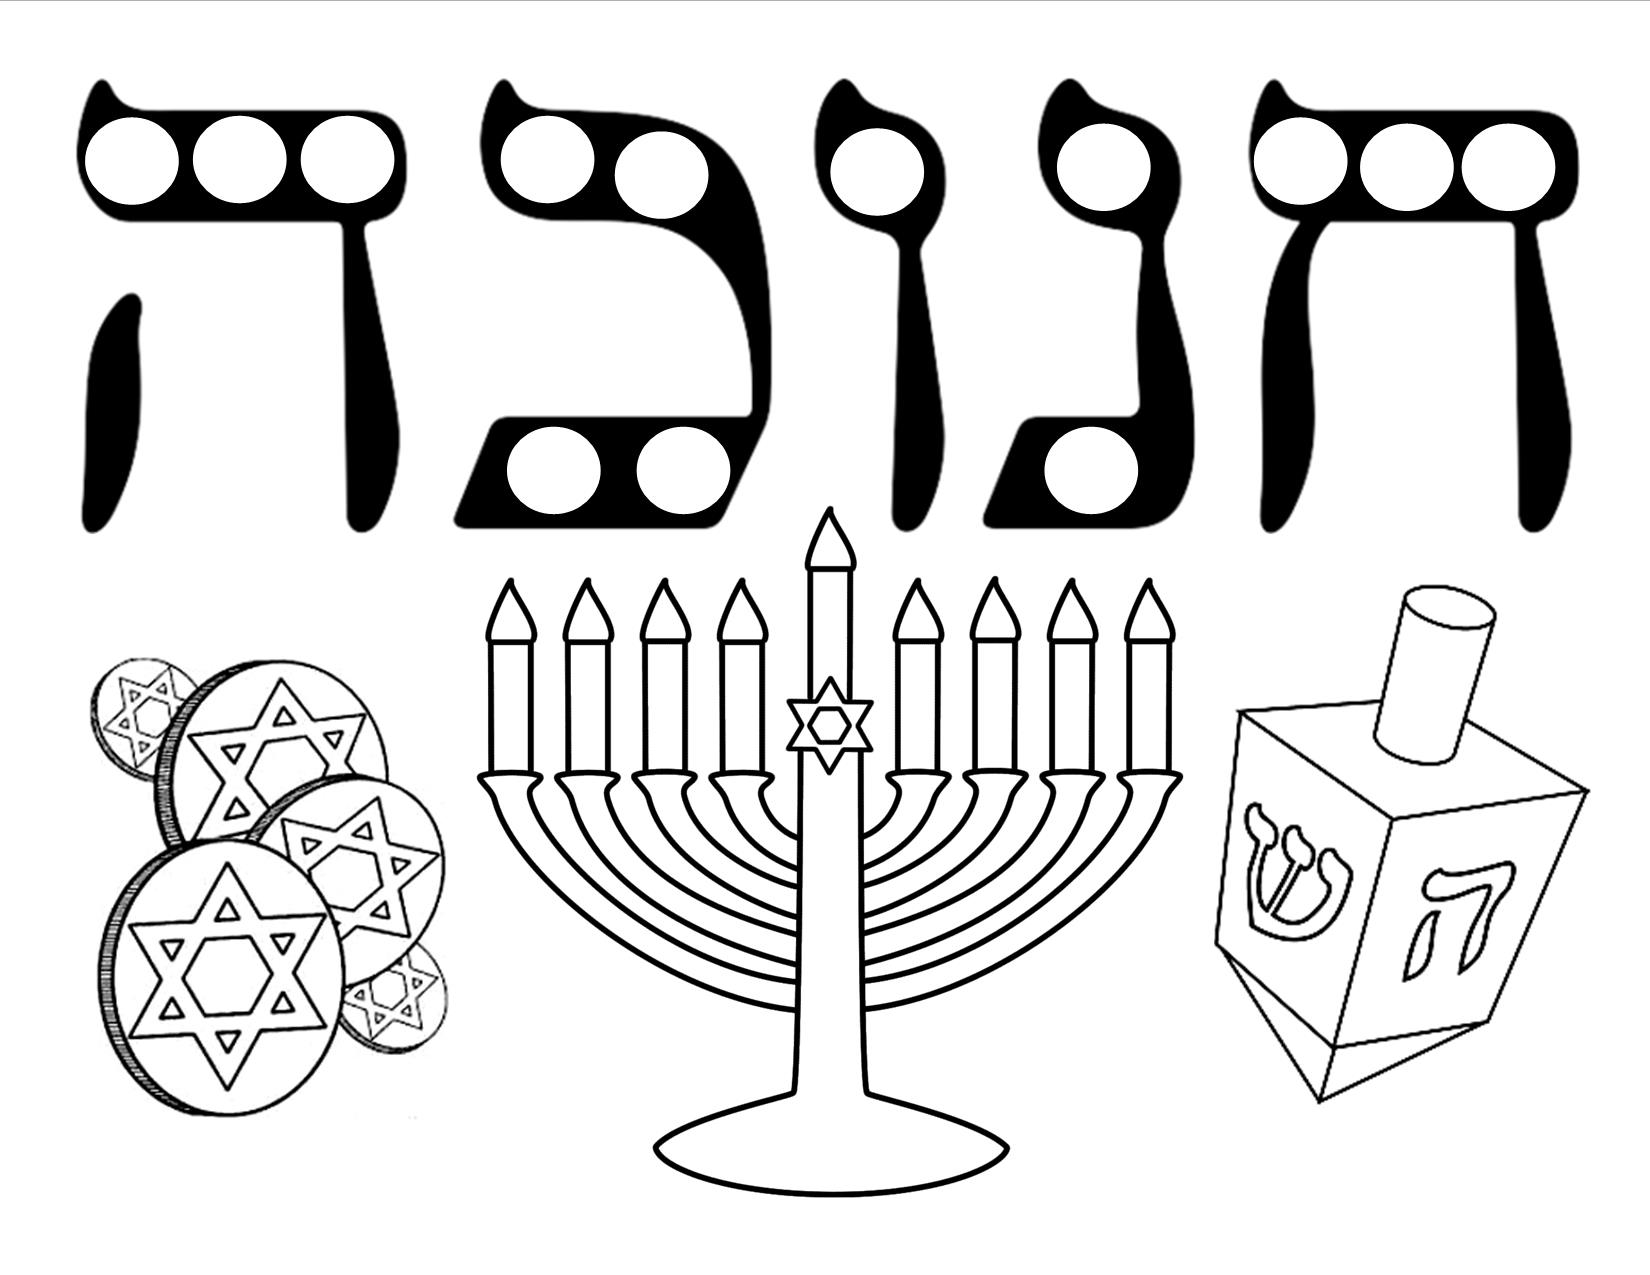 Chanukah Coloring Pages To Print at